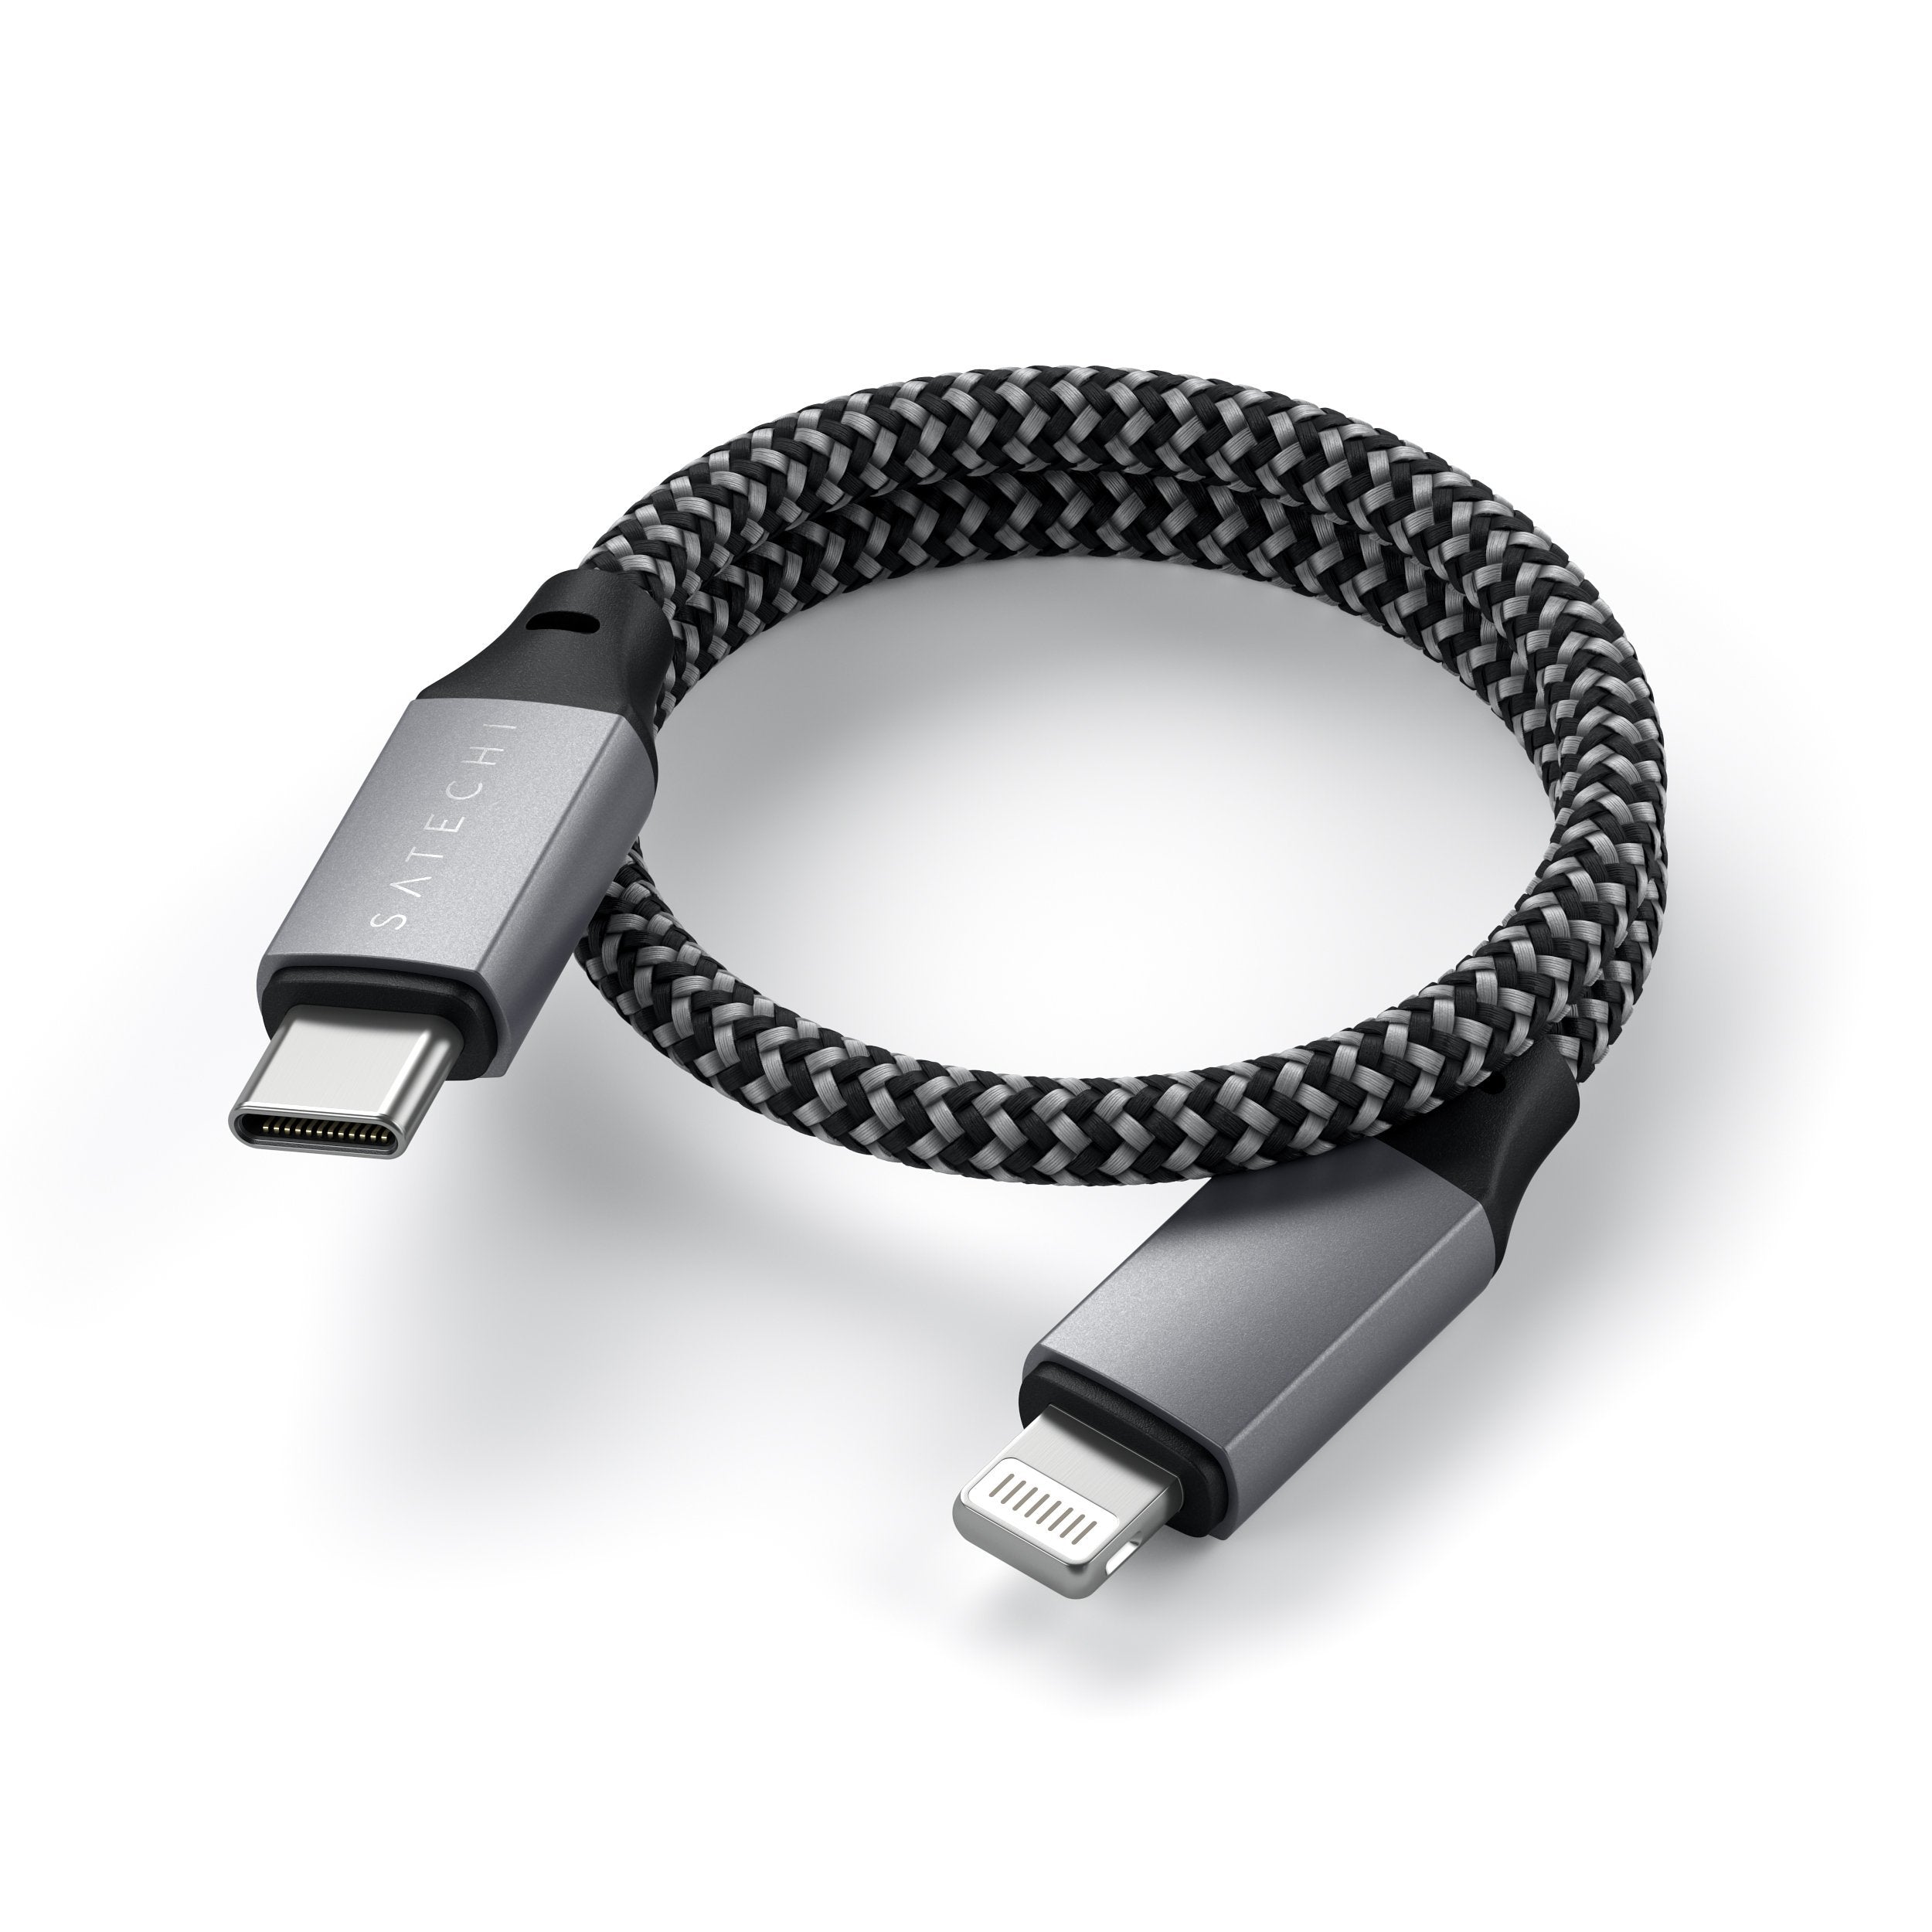 USB-C to Lightning Cable - 10 Inches Cables Satechi 